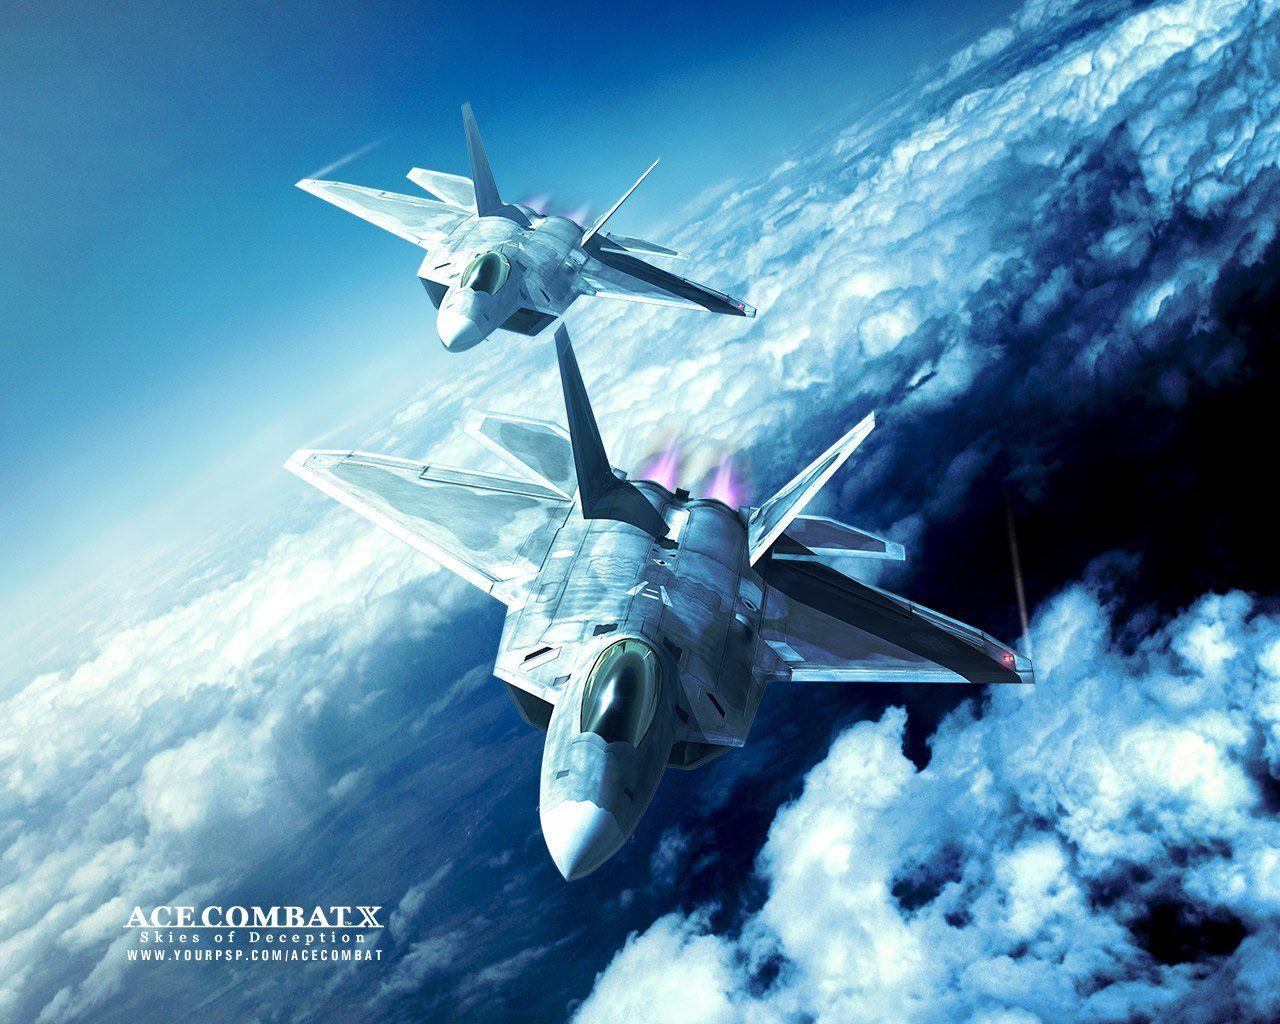 ACE COMBAT 7 Skies Unknown will be coming to the PC new screenshots  released